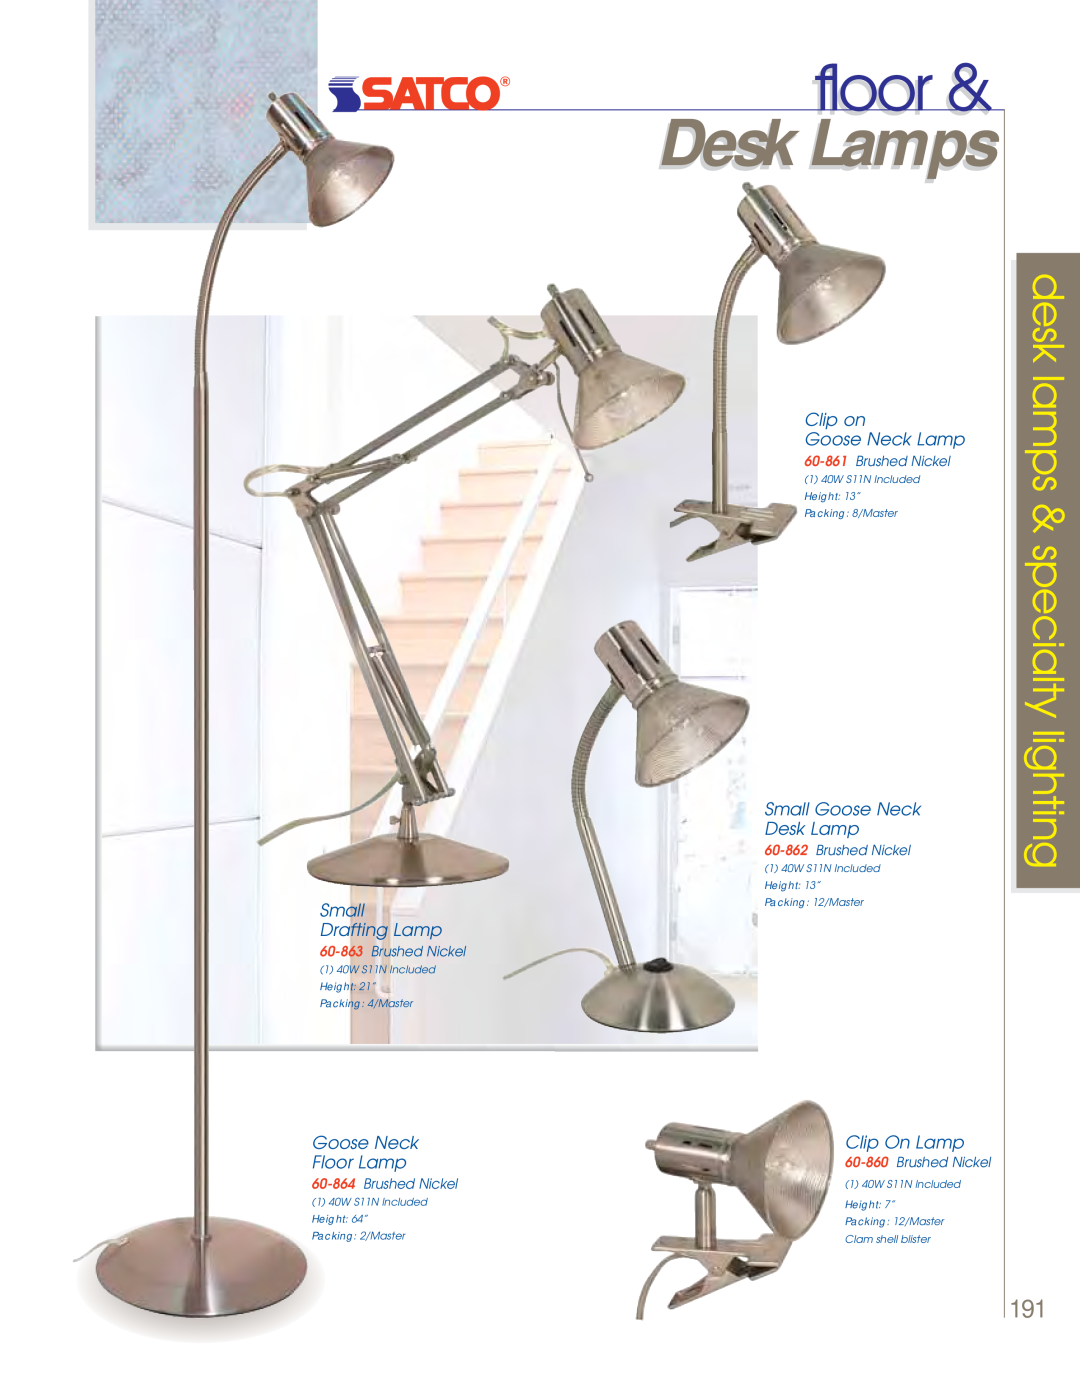 Satco Products 60-800 manual floor, Desk Lamps, desk lamps & specialty lighting, Small Drafting Lamp, Goose Neck Floor Lamp 